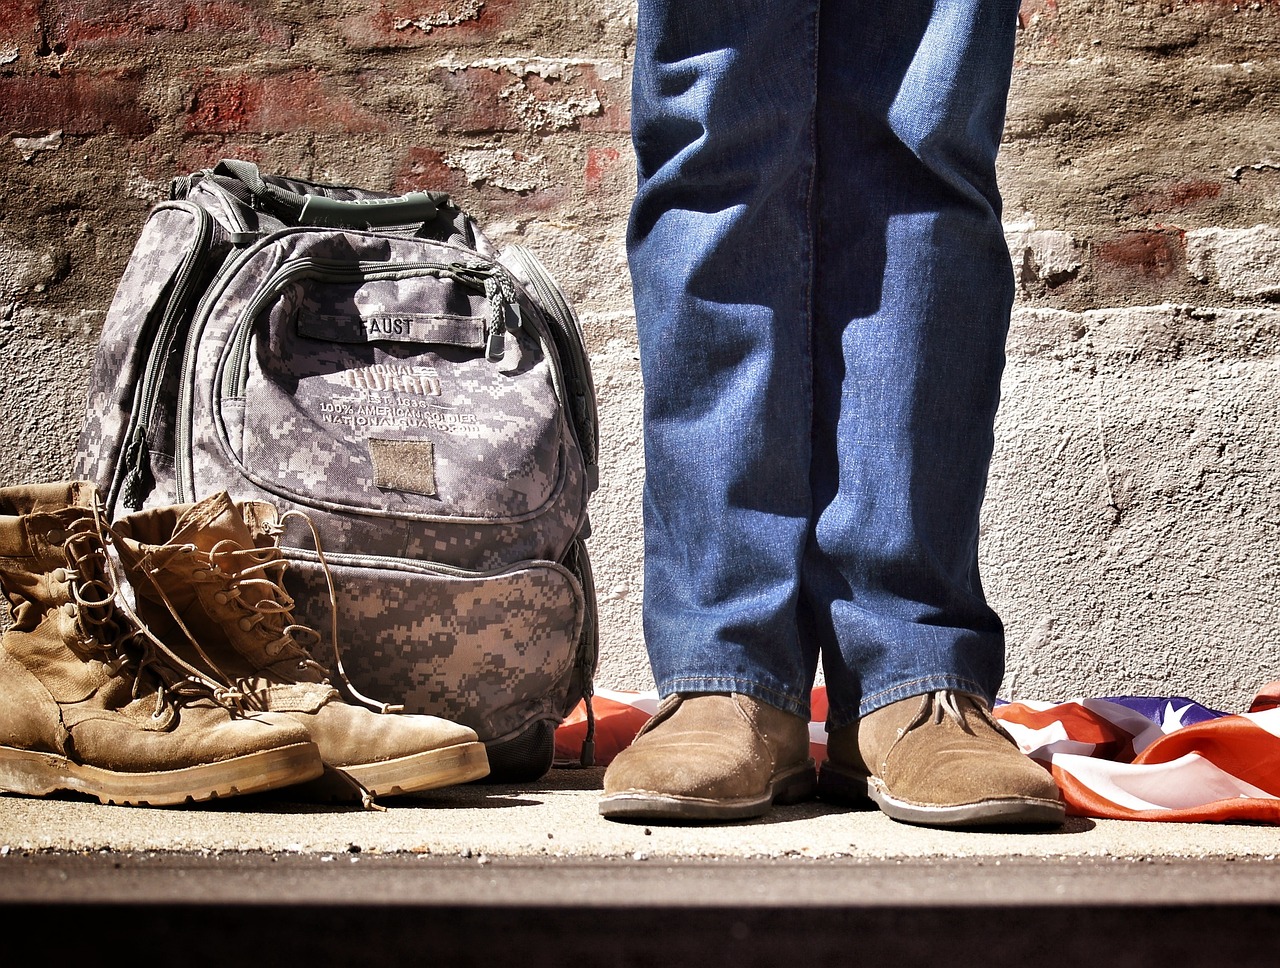 A person standing next to a backpack and shoes.